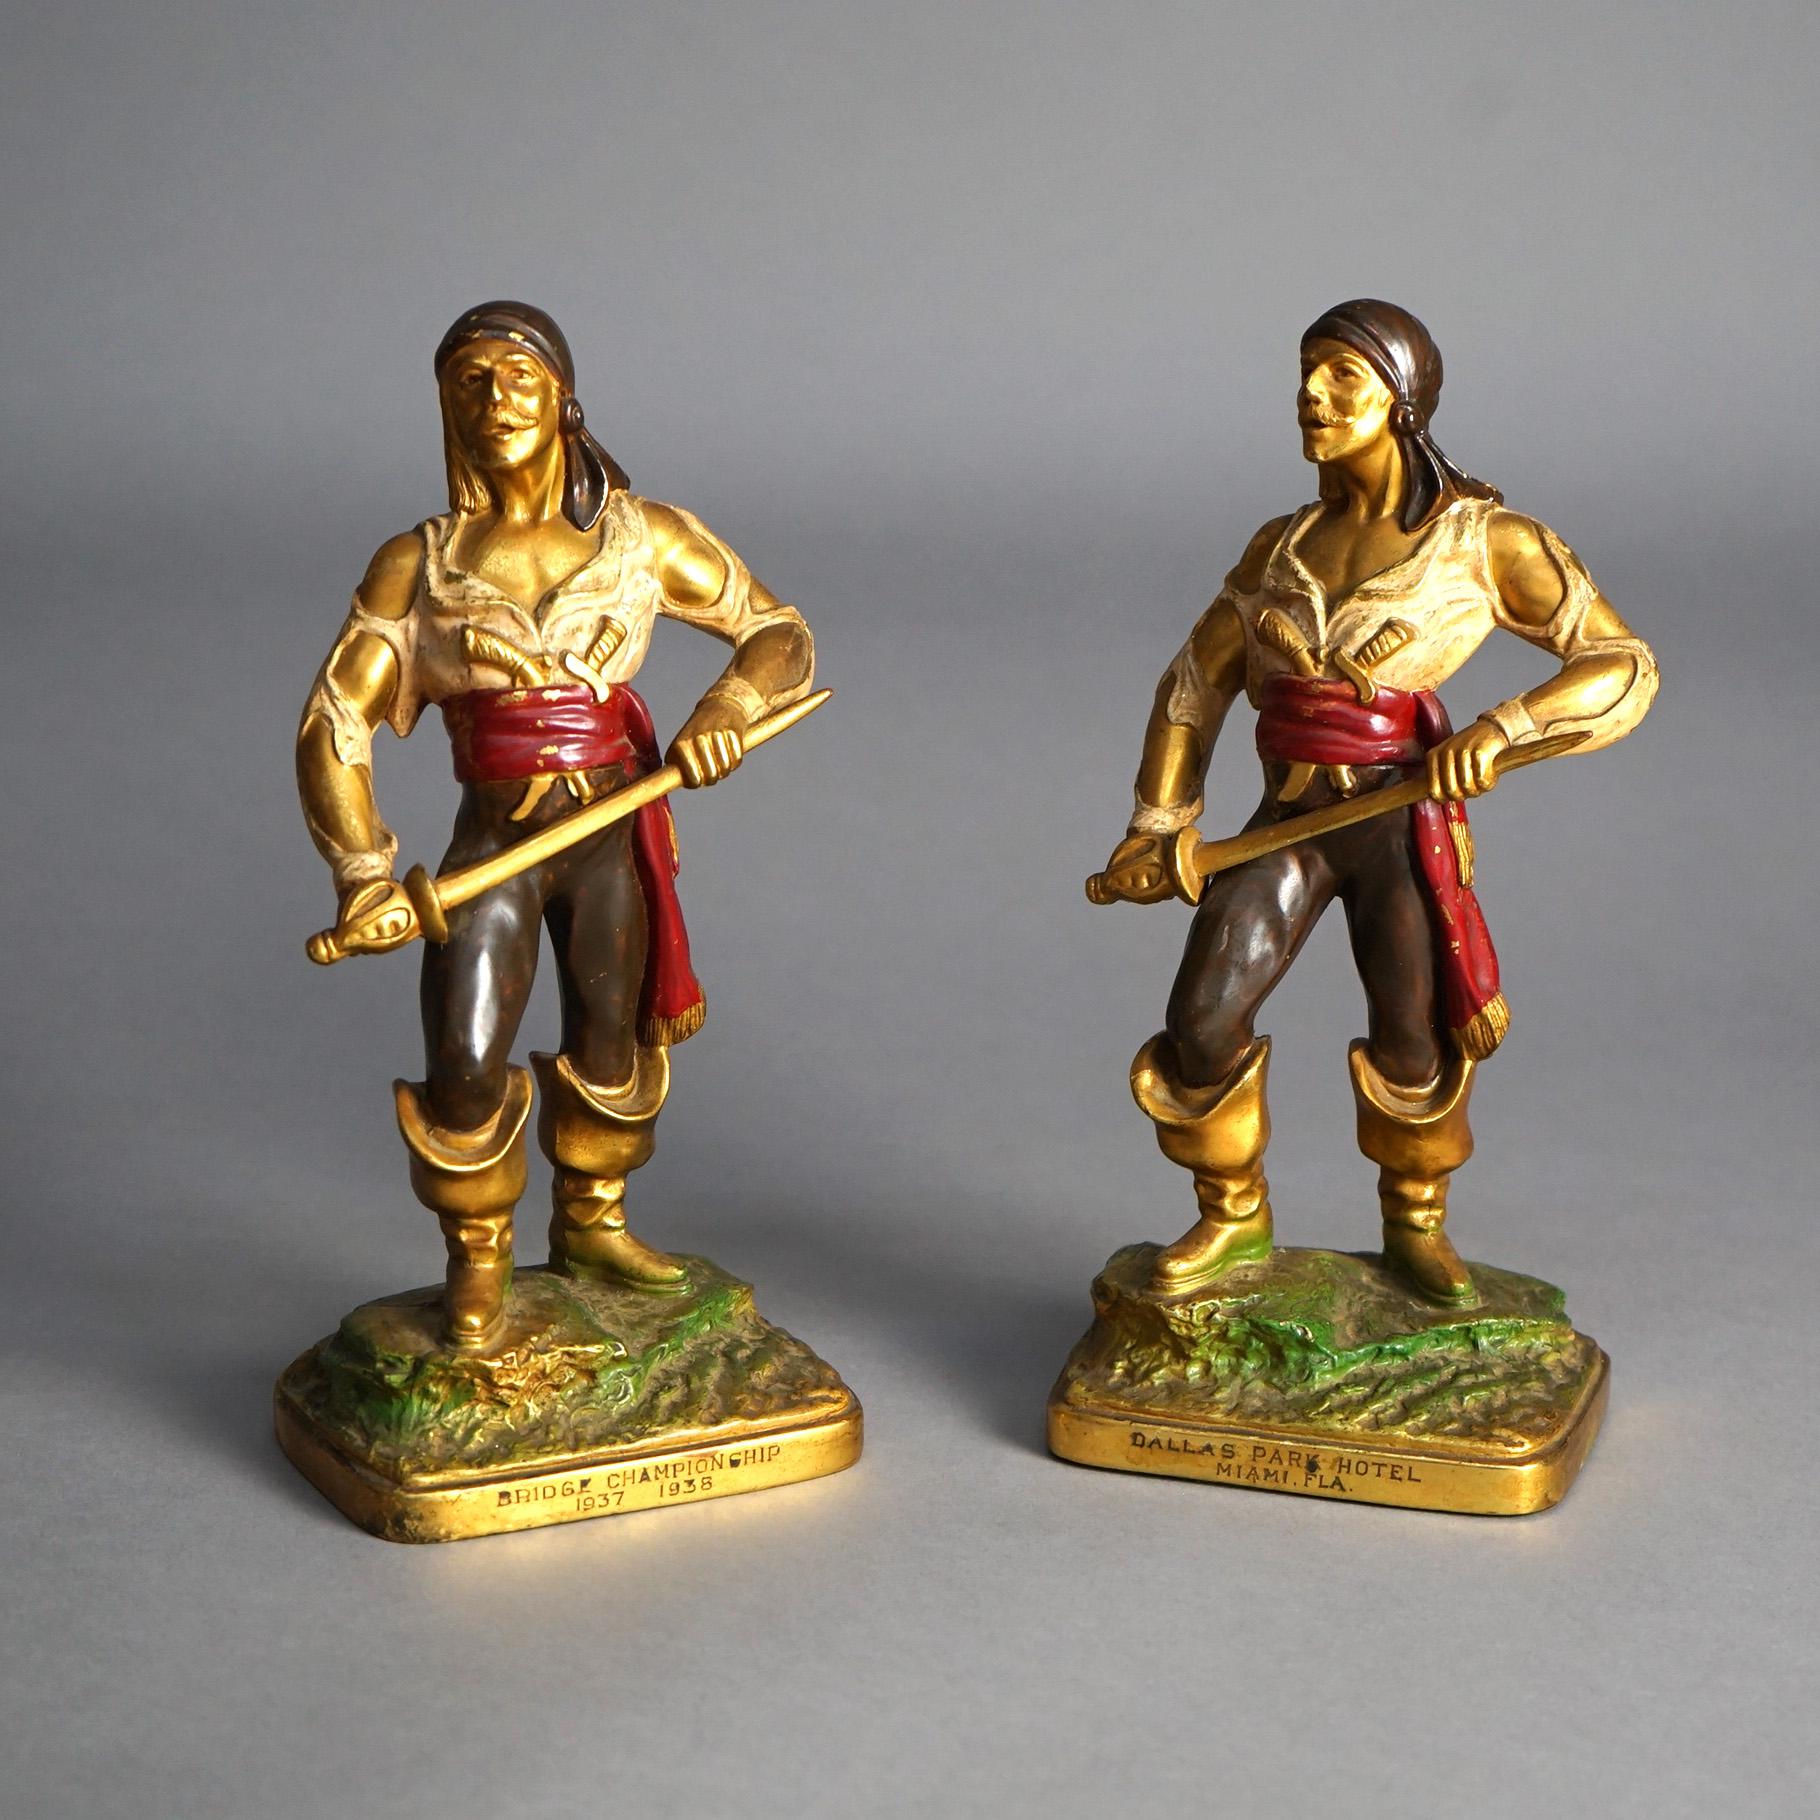 An antique pair of pirate figures offer bronzed and polychromed cast metal construction with 